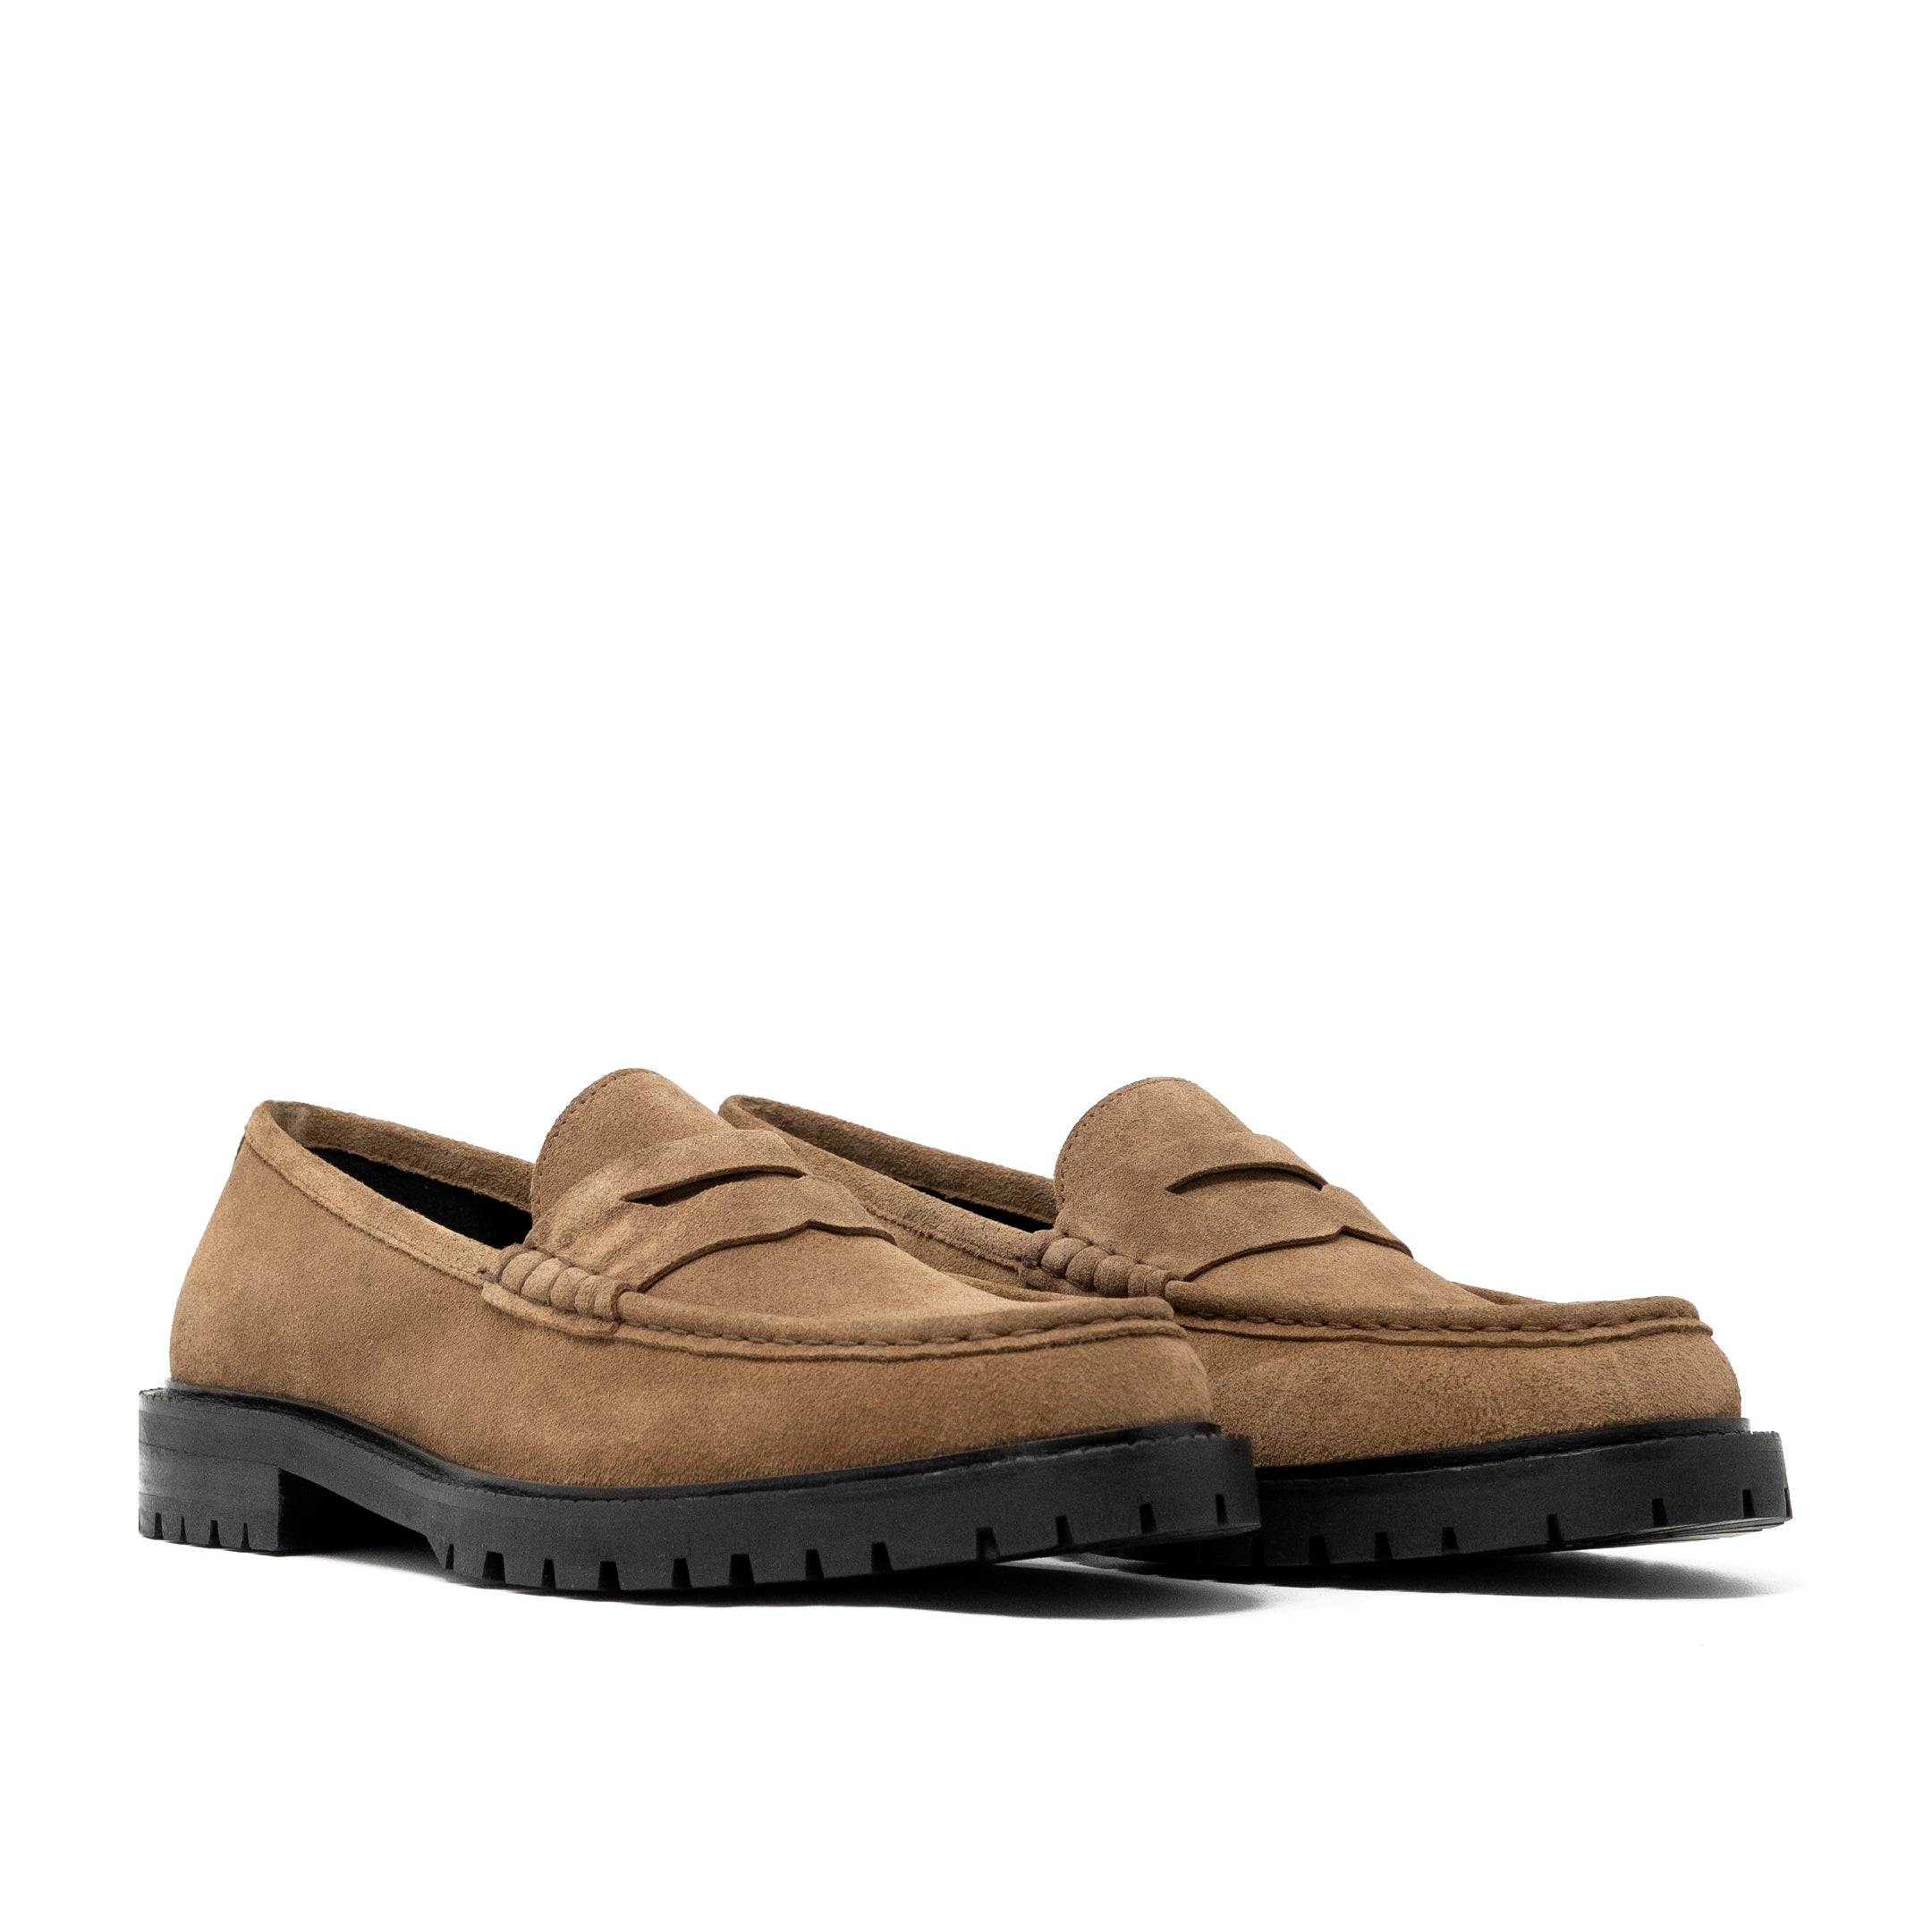 Tan Suede Campus Saddle Loafer